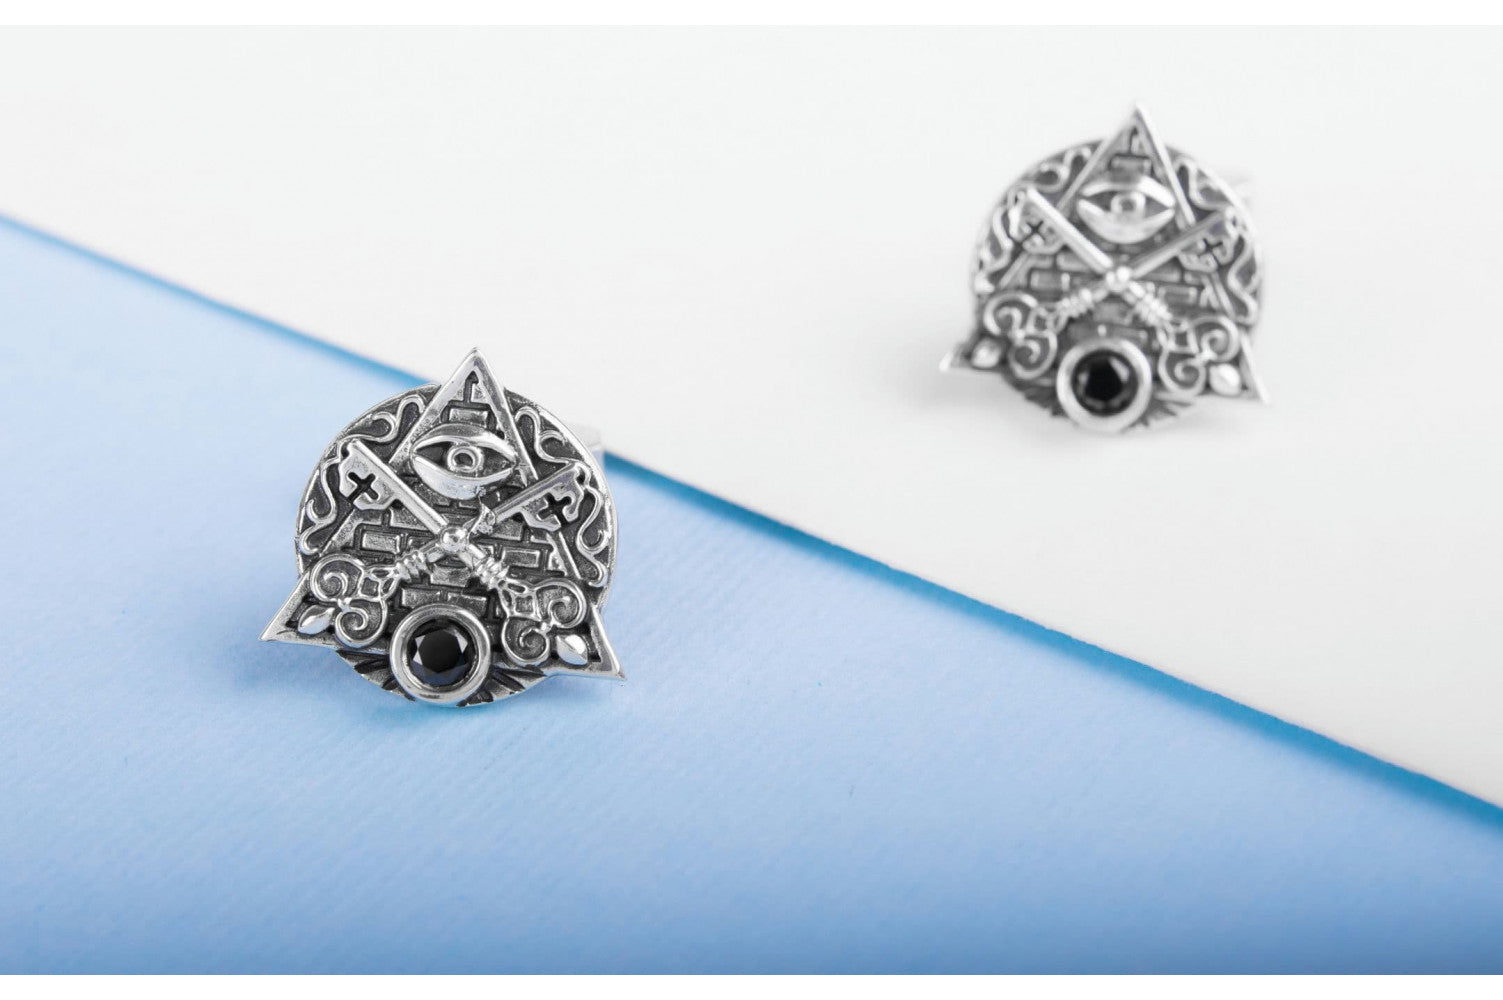 Unique 925 Silver Masonic Cufflinks with All seing Eye and brick ornament, handmade jewelry